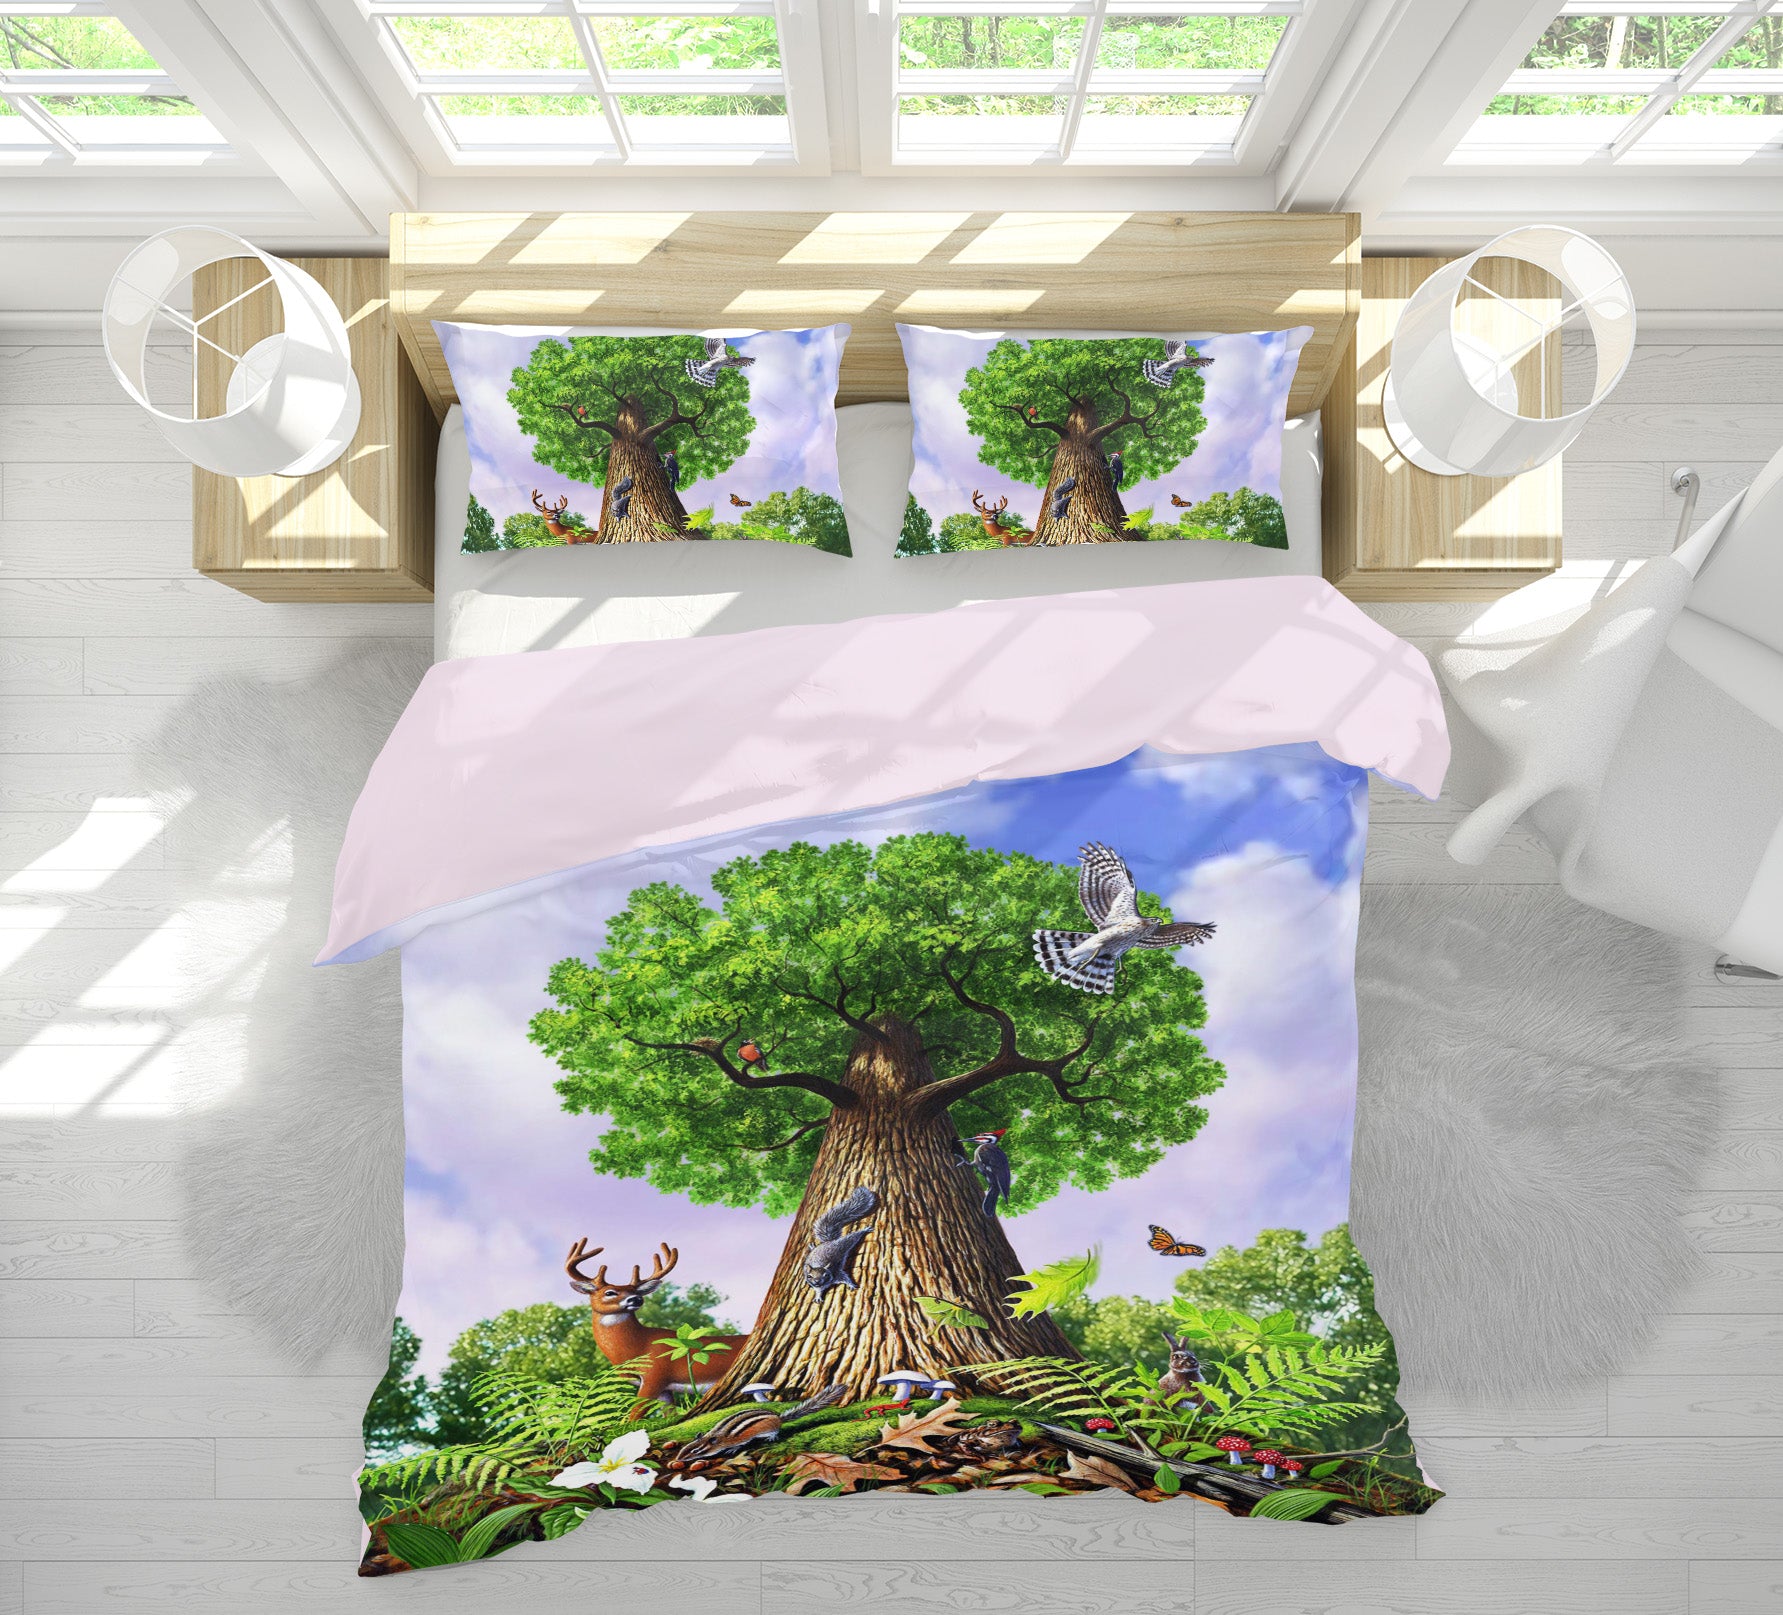 3D Tree Of Life 2134 Jerry LoFaro bedding Bed Pillowcases Quilt